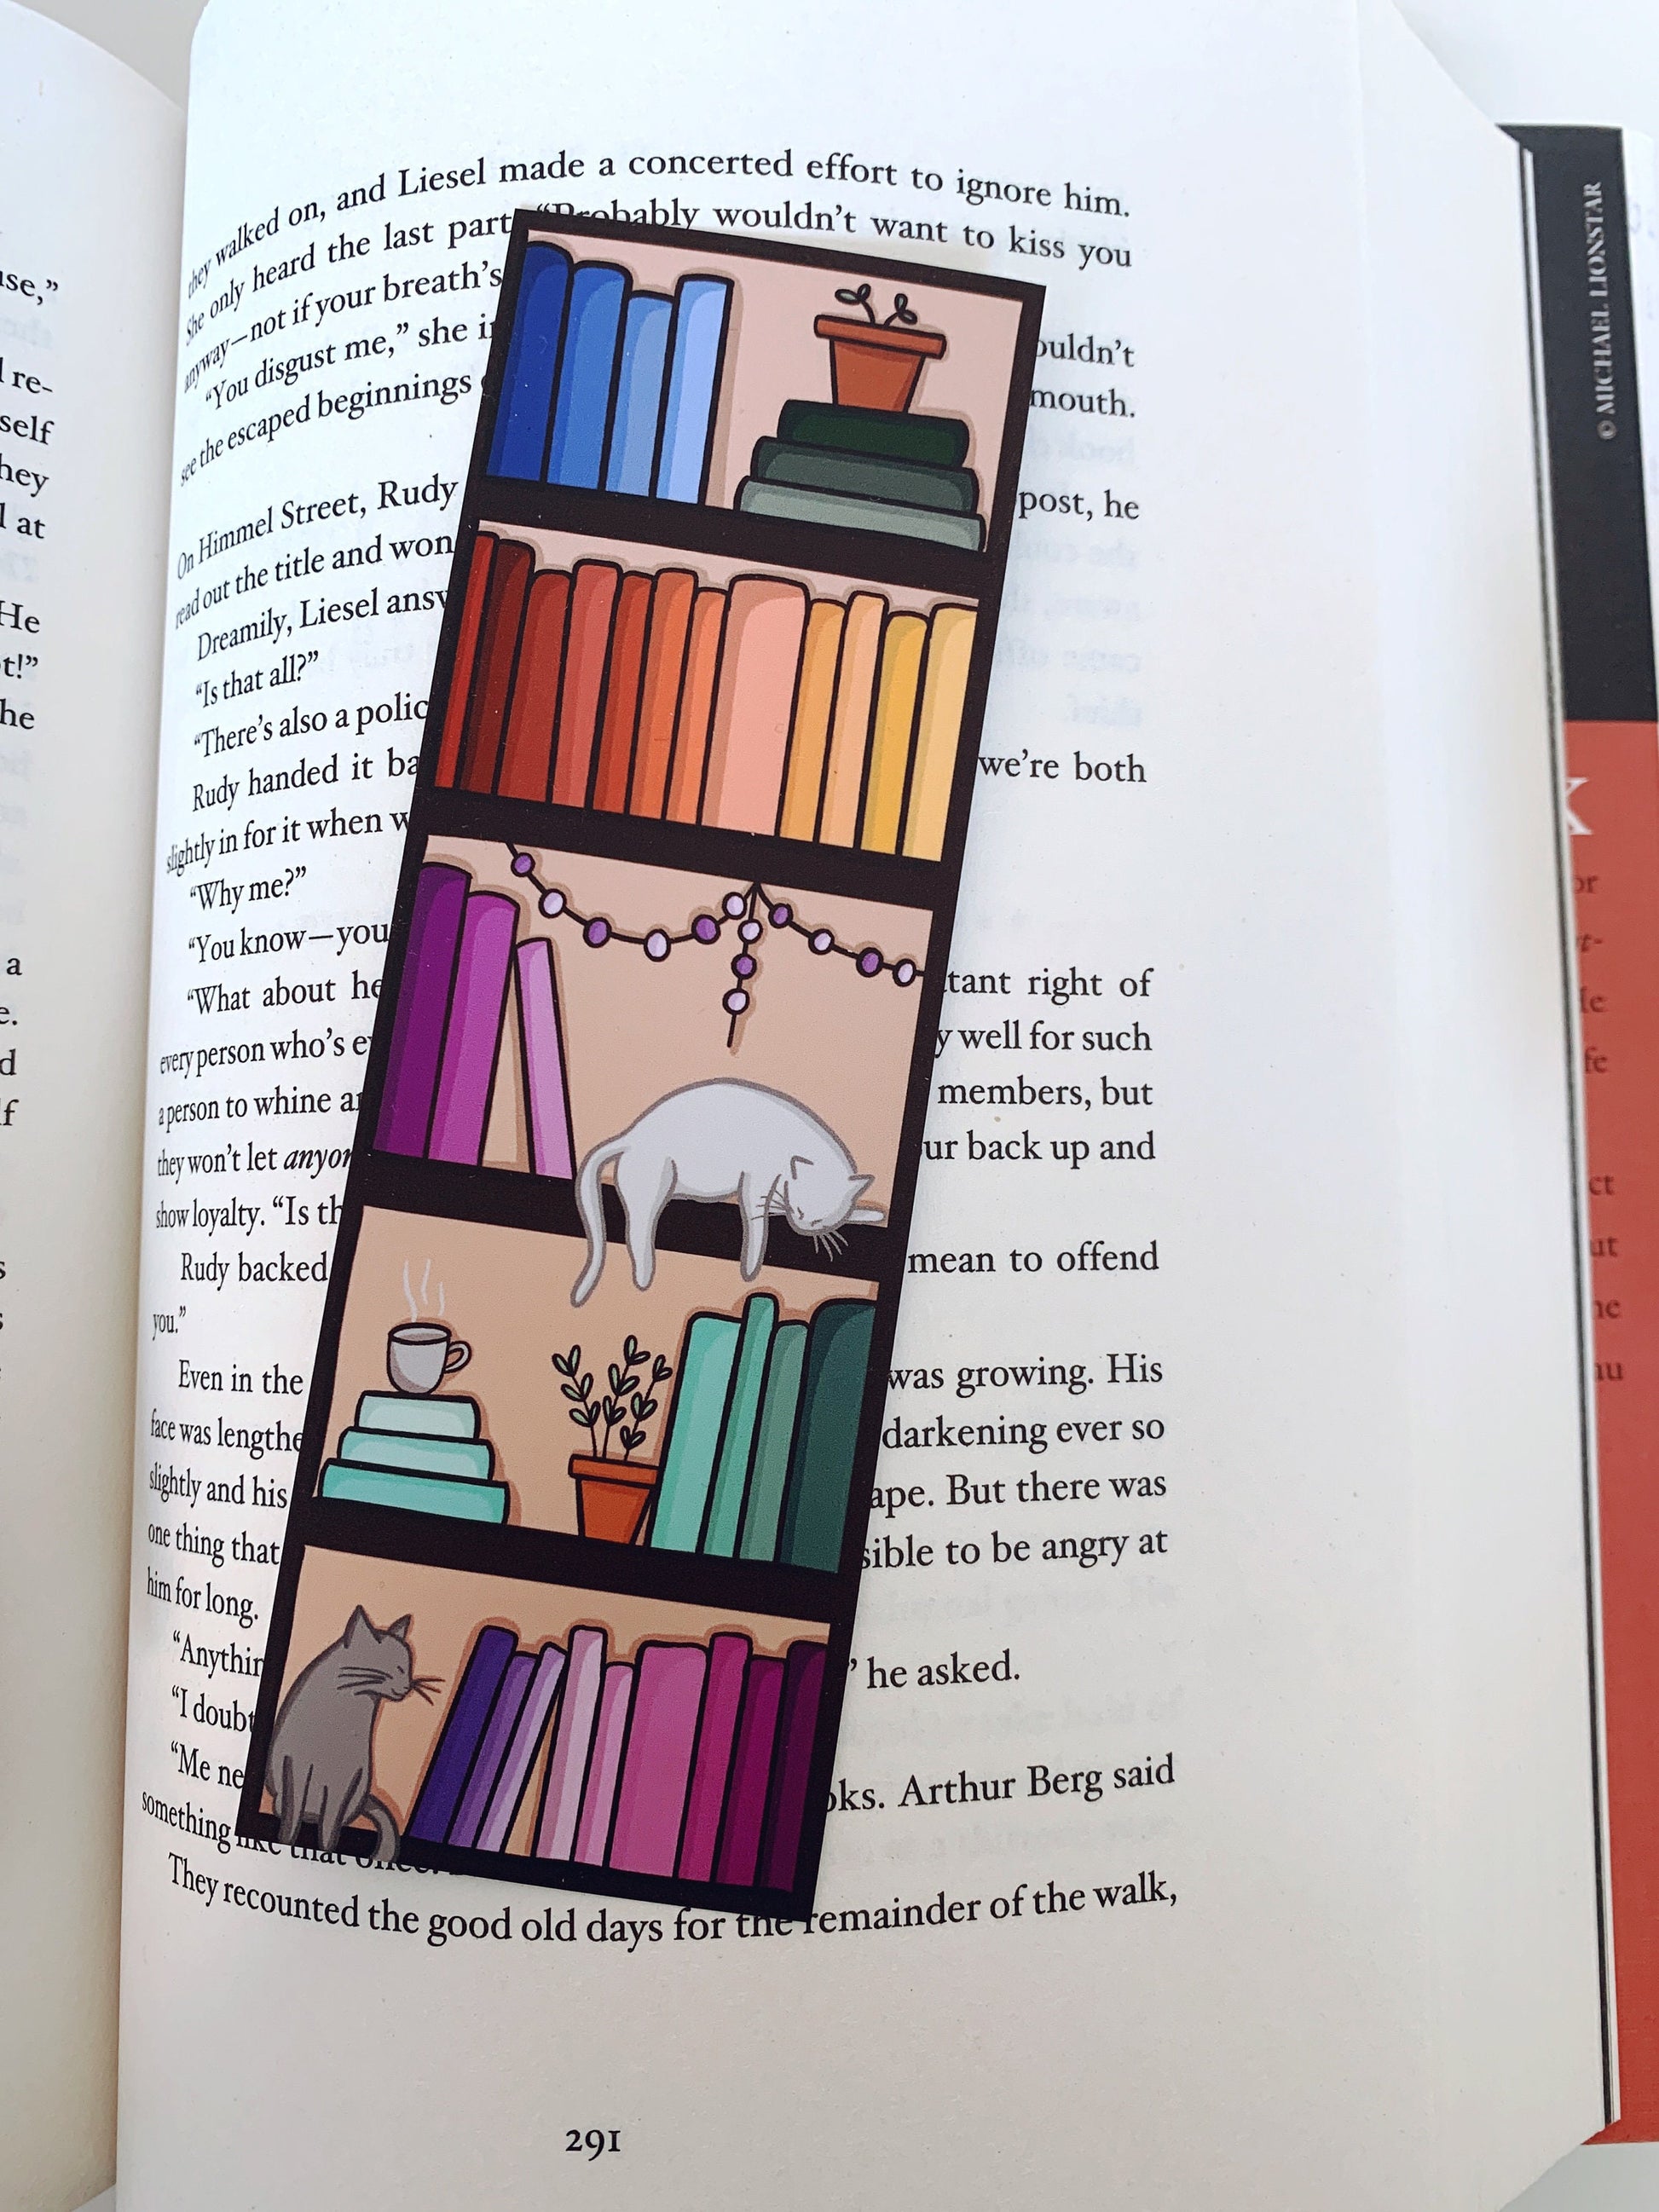 Custom Bookshelf Bookmark, Just One More Page, Bookmark with